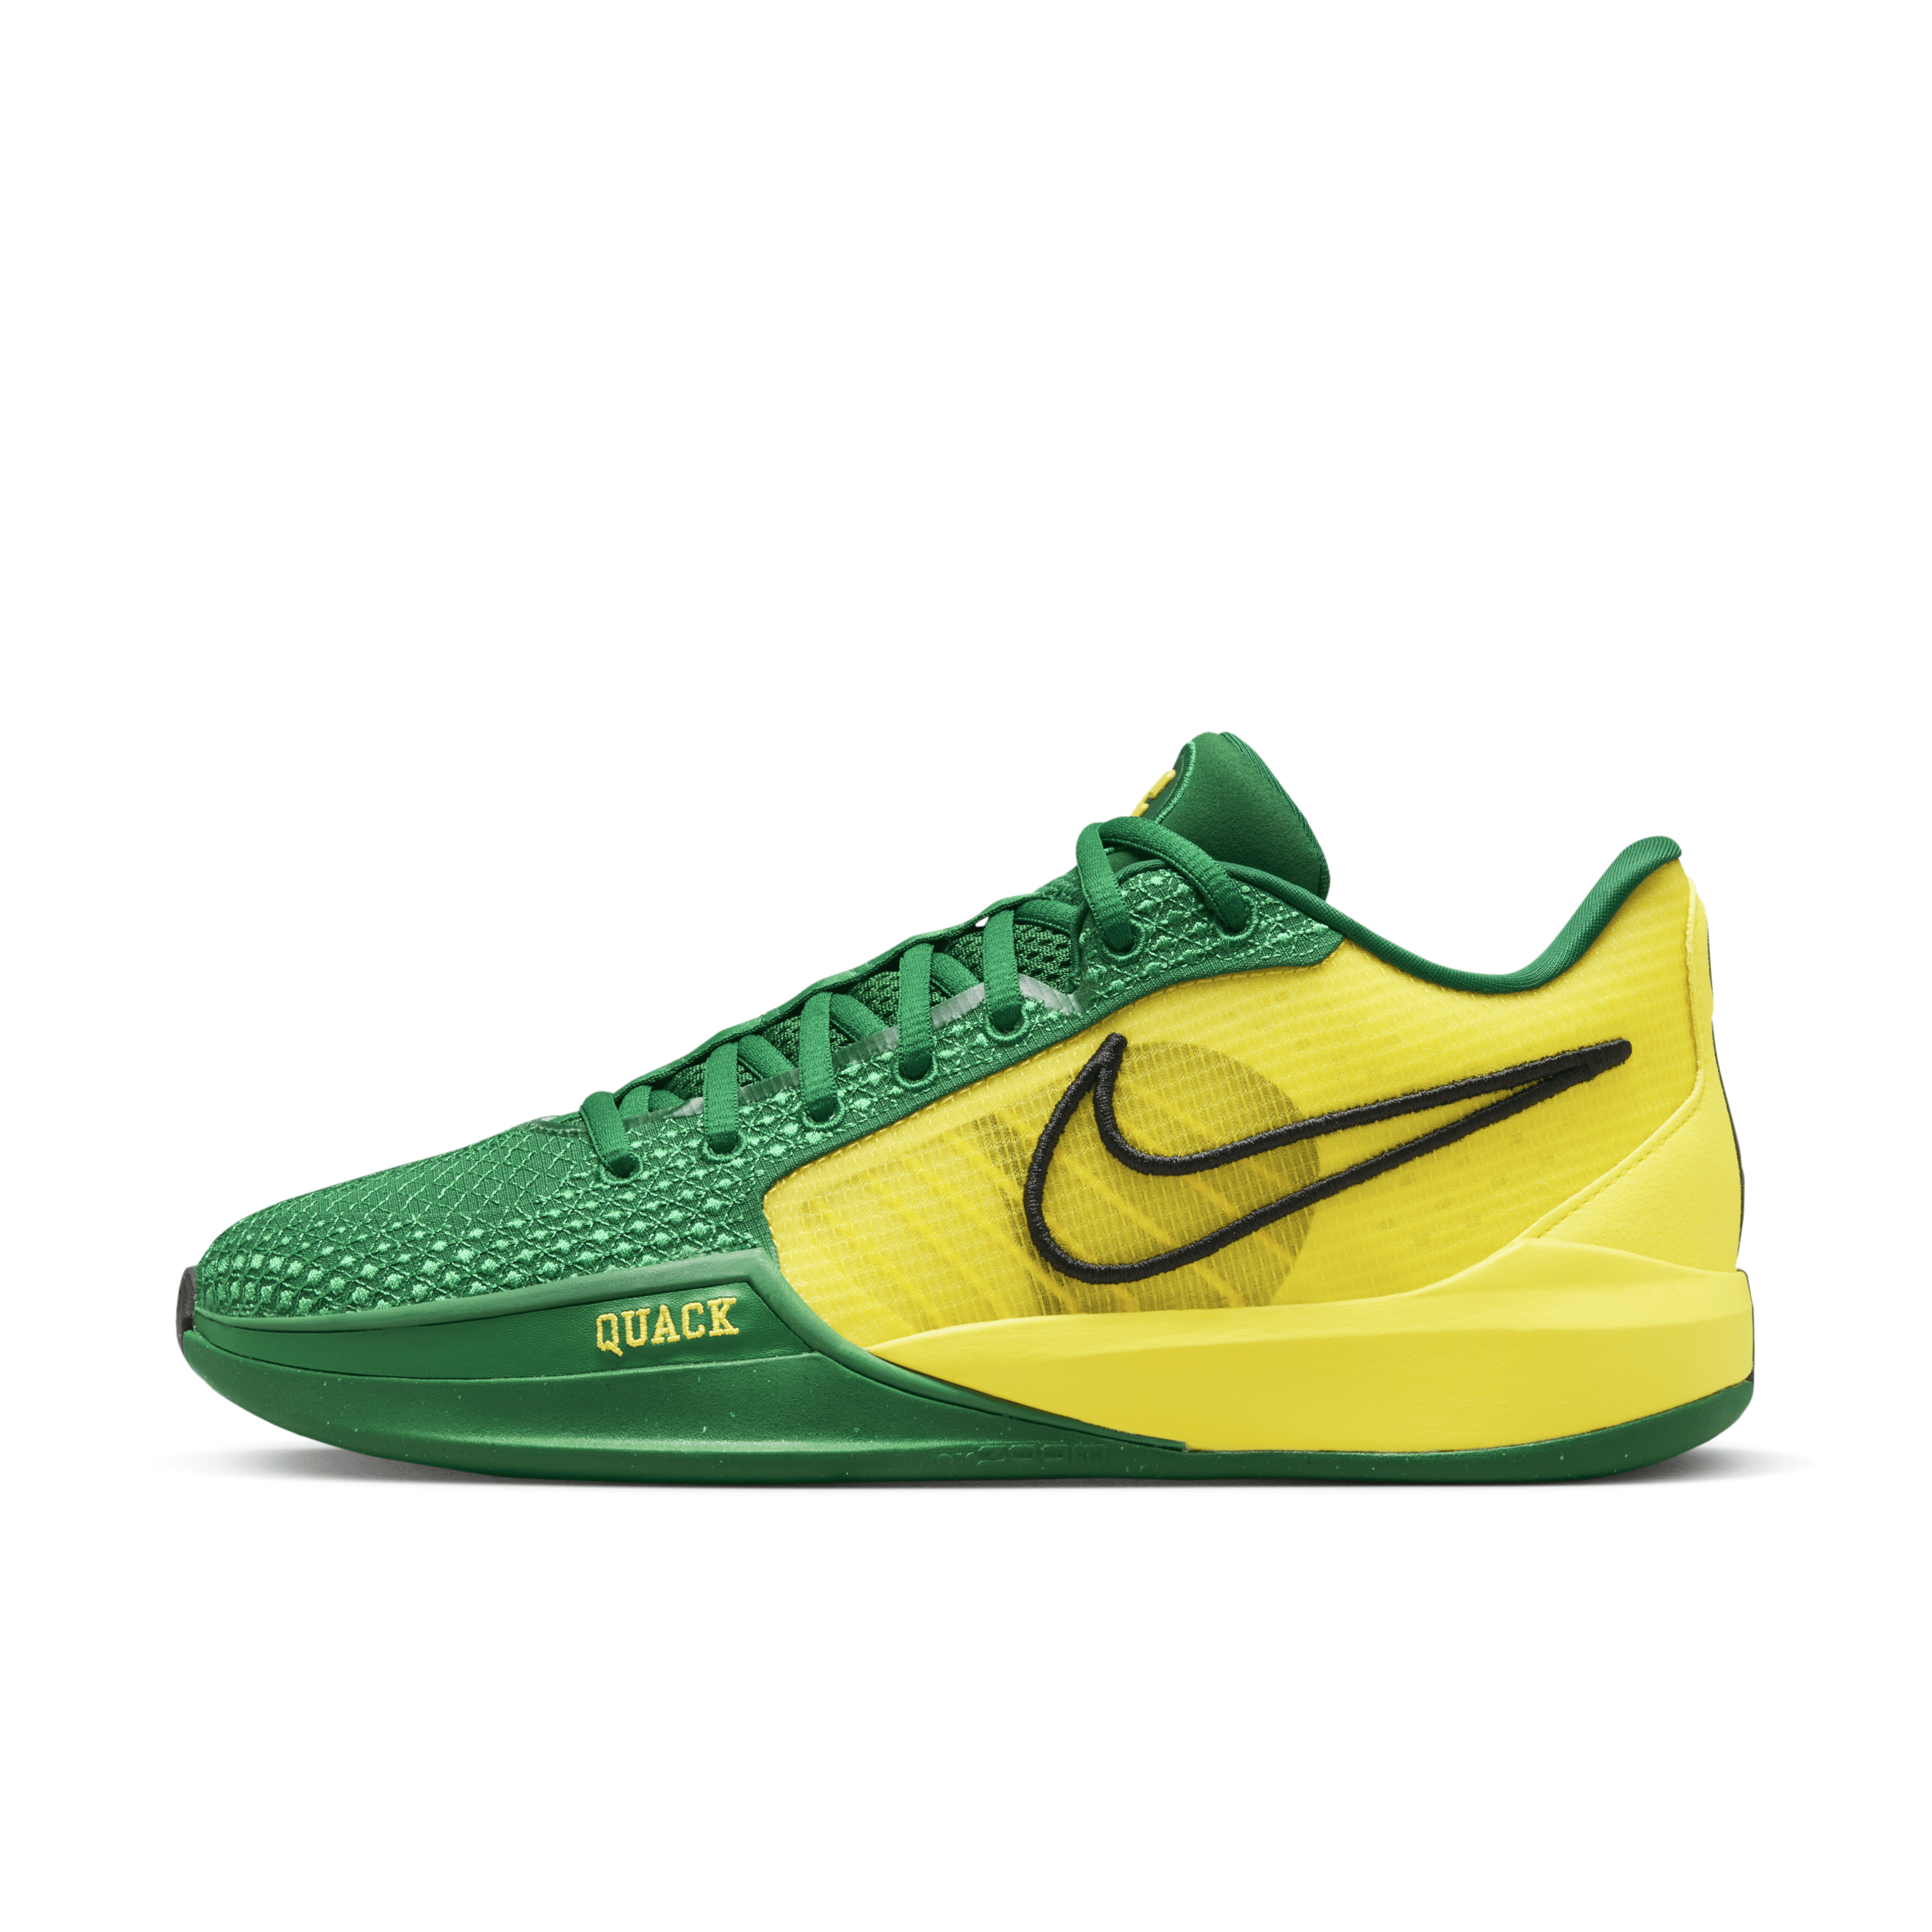 Nike Women's Sabrina 1 "the Debut" Basketball Shoes In Green